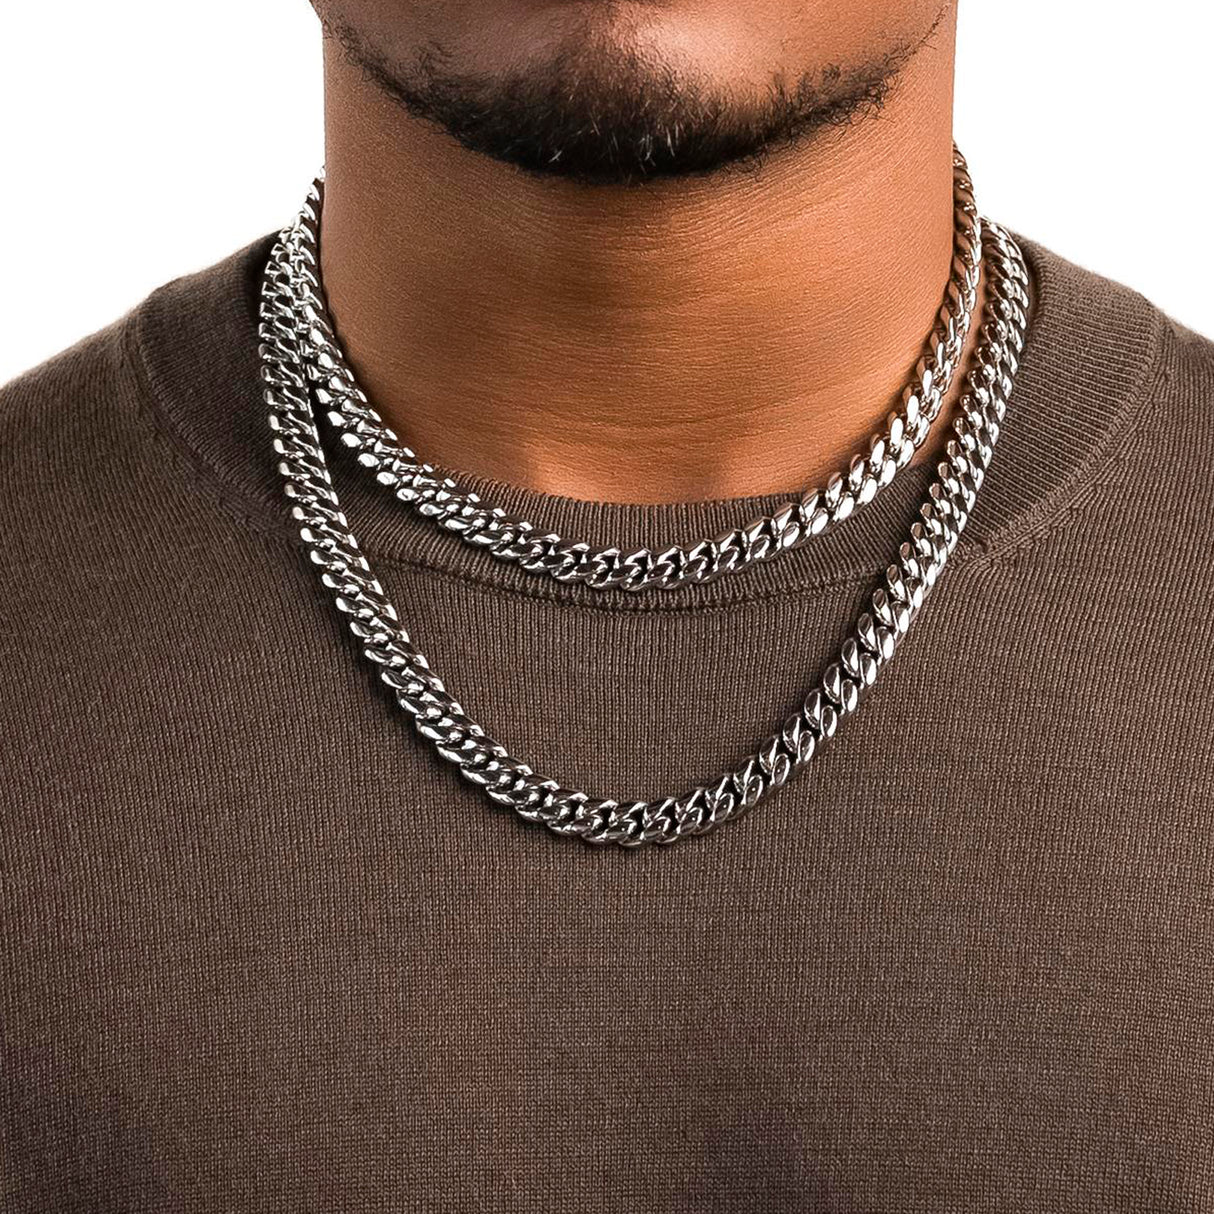 the-gold-gods-mens-jewelry-18k-white-gold-plated-miami-cuban-link-necklace-10mm